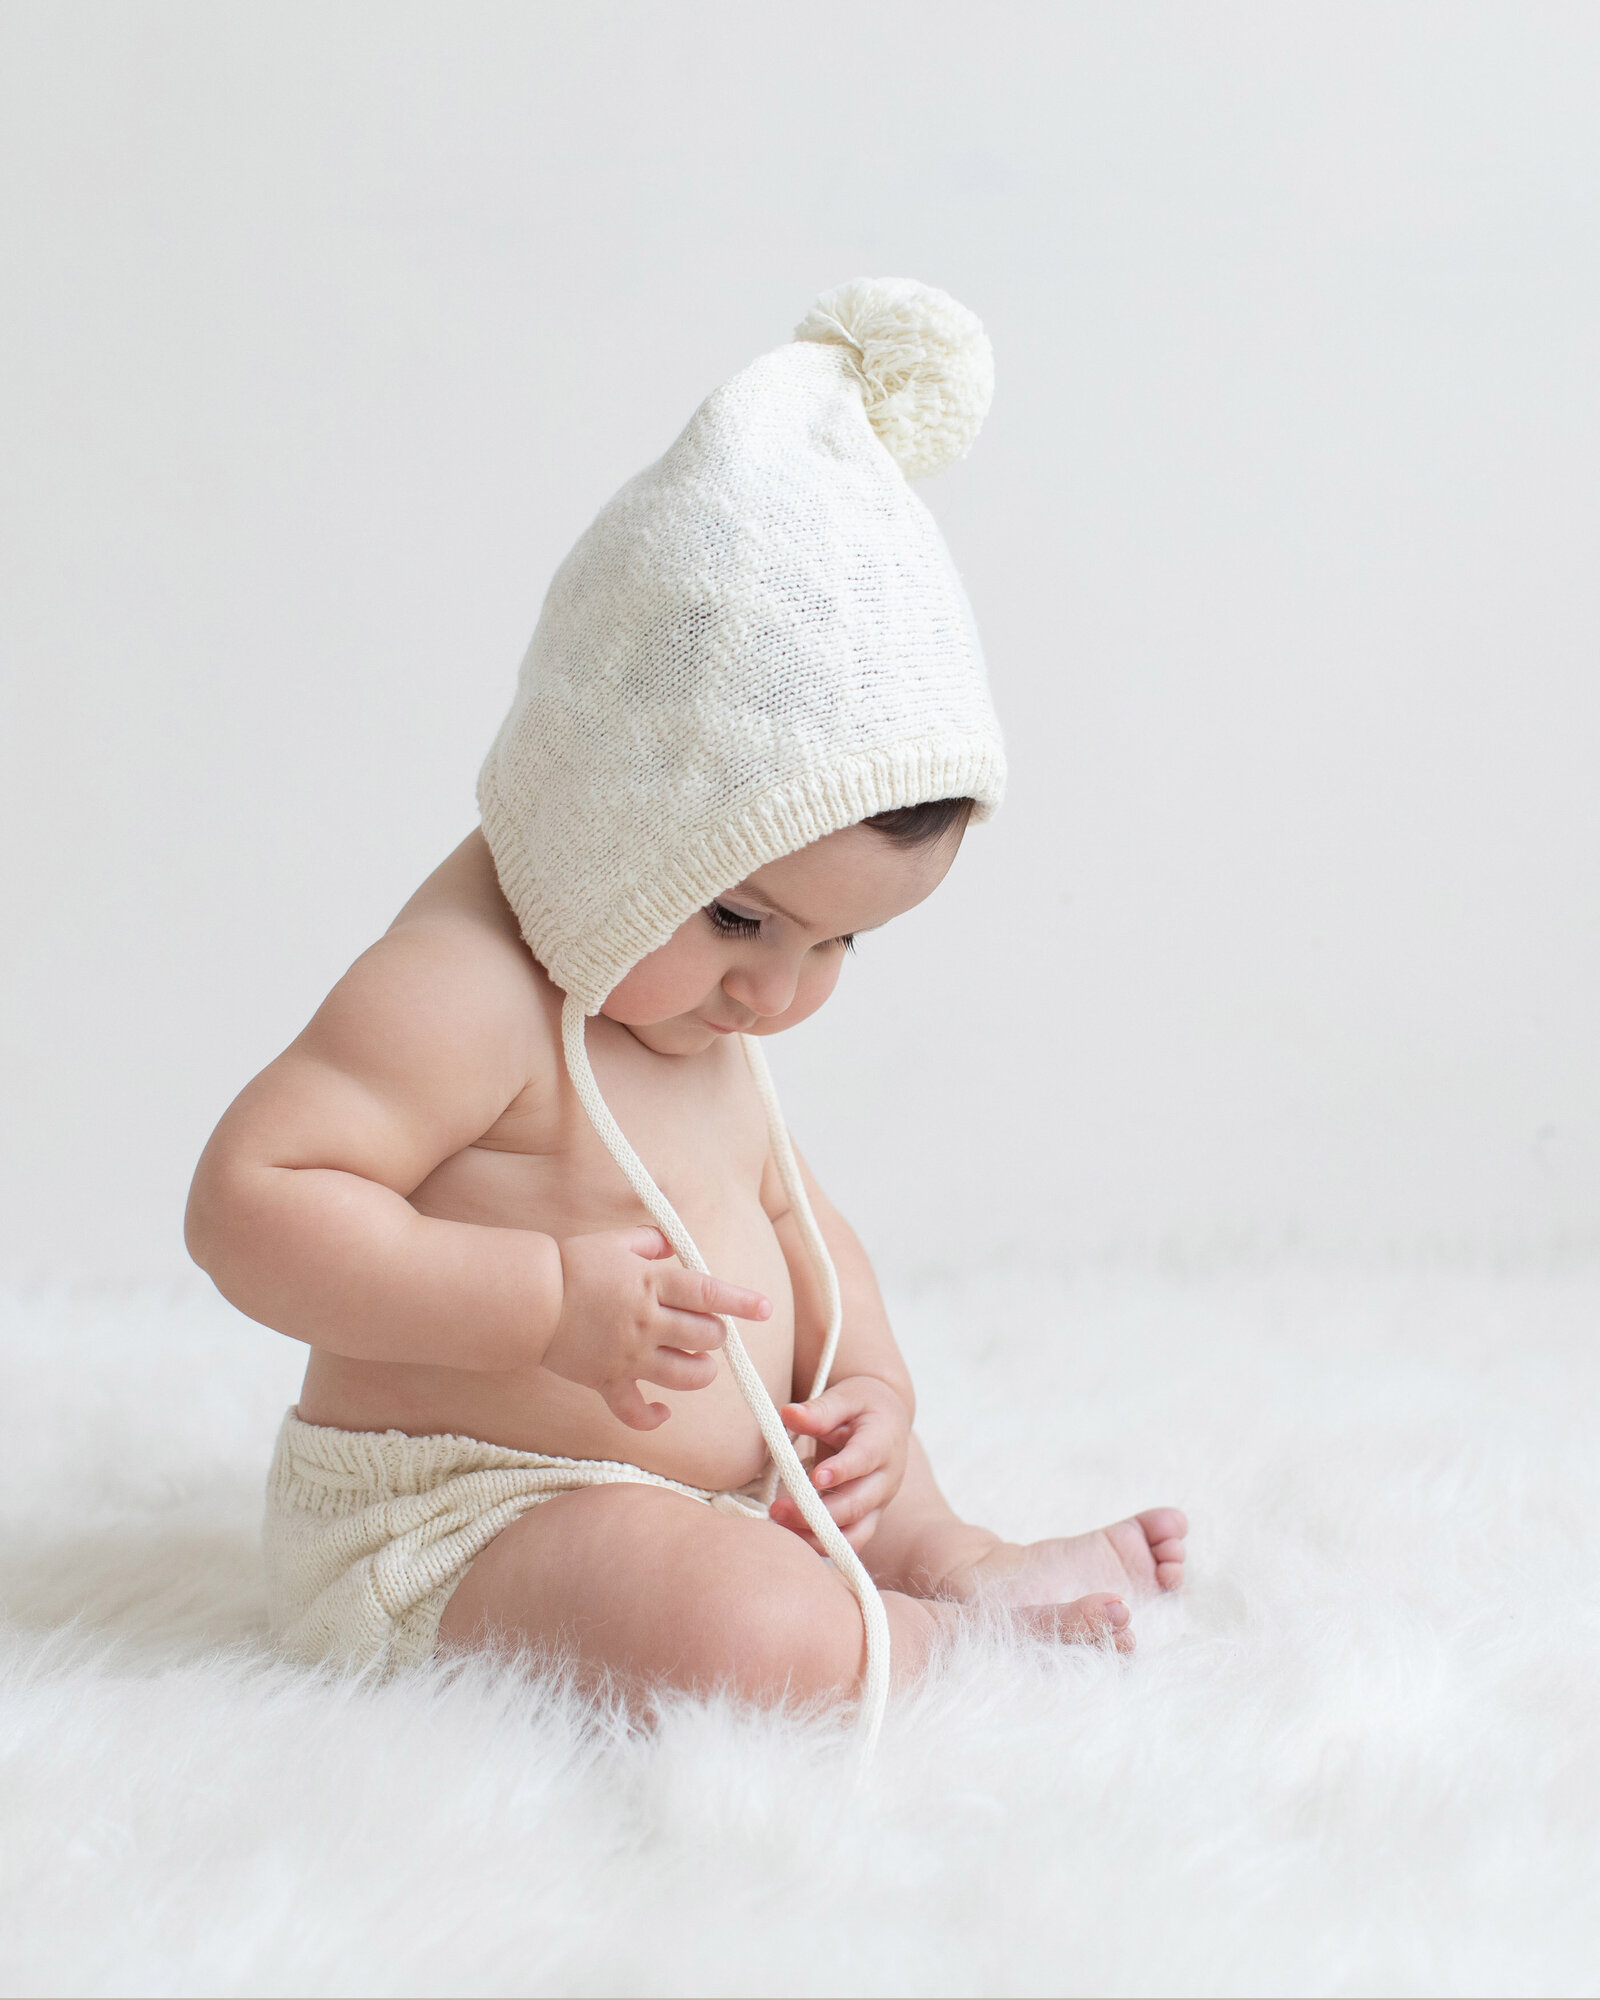 cute-baby-in-white-hat